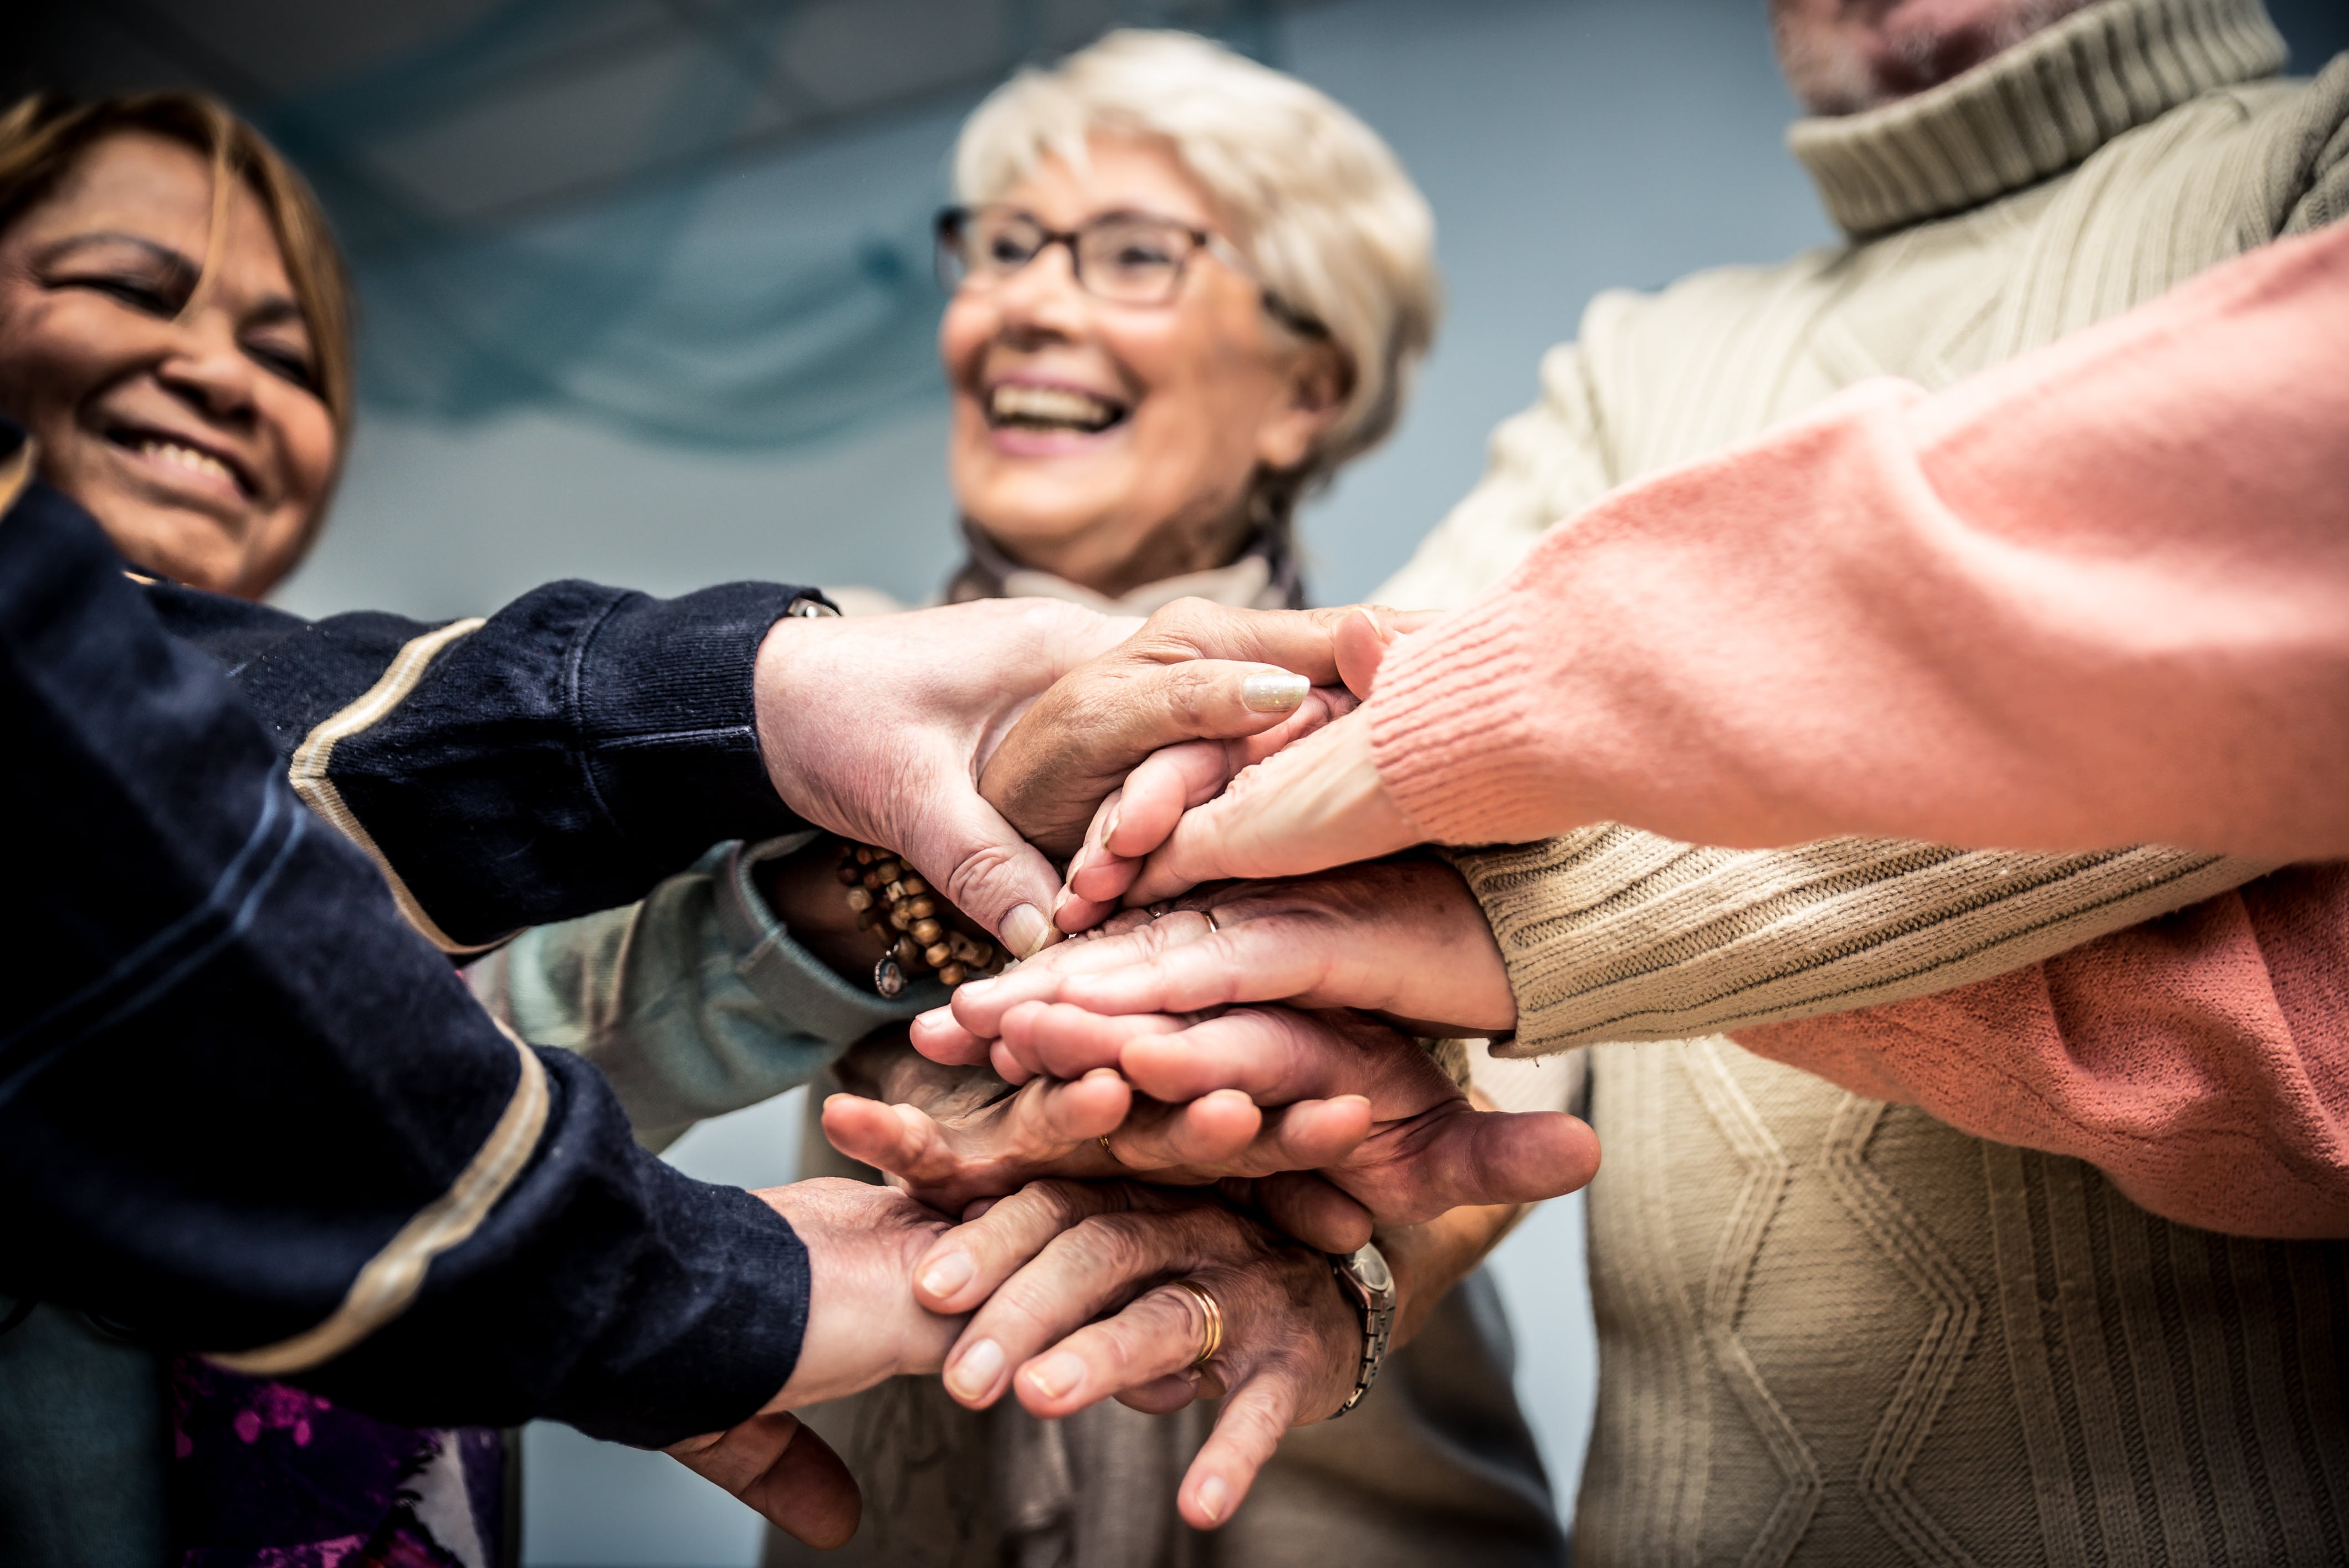 Older adults and loved ones joining hands– we're all in this together!